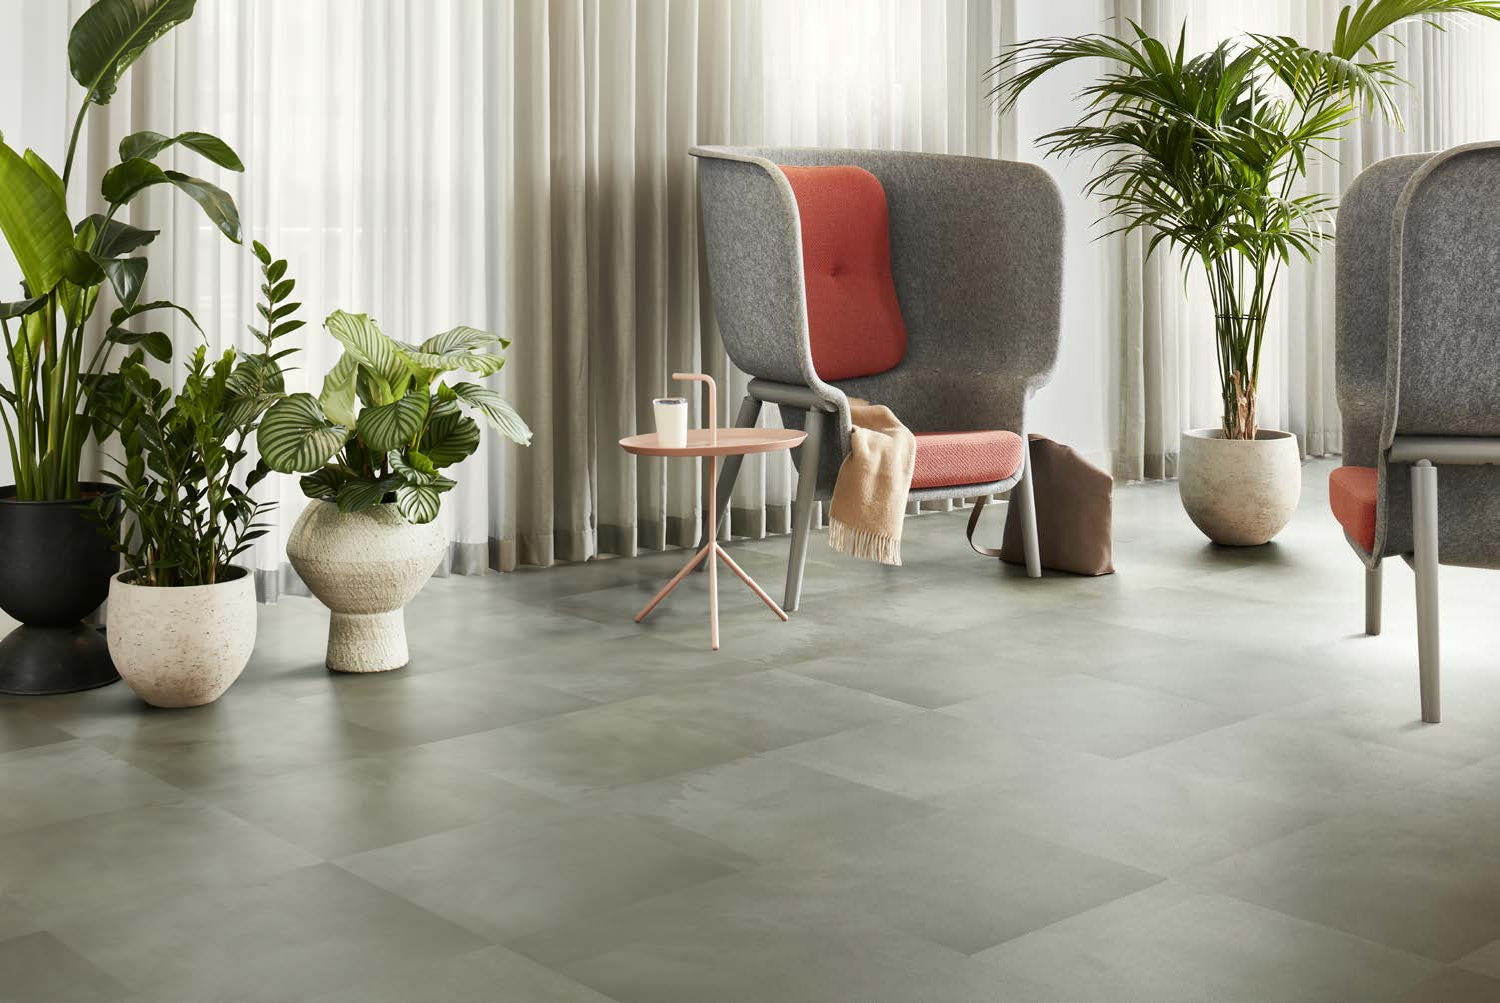 The new Iridescence LVT inspired by the use of mineral and organic pigments